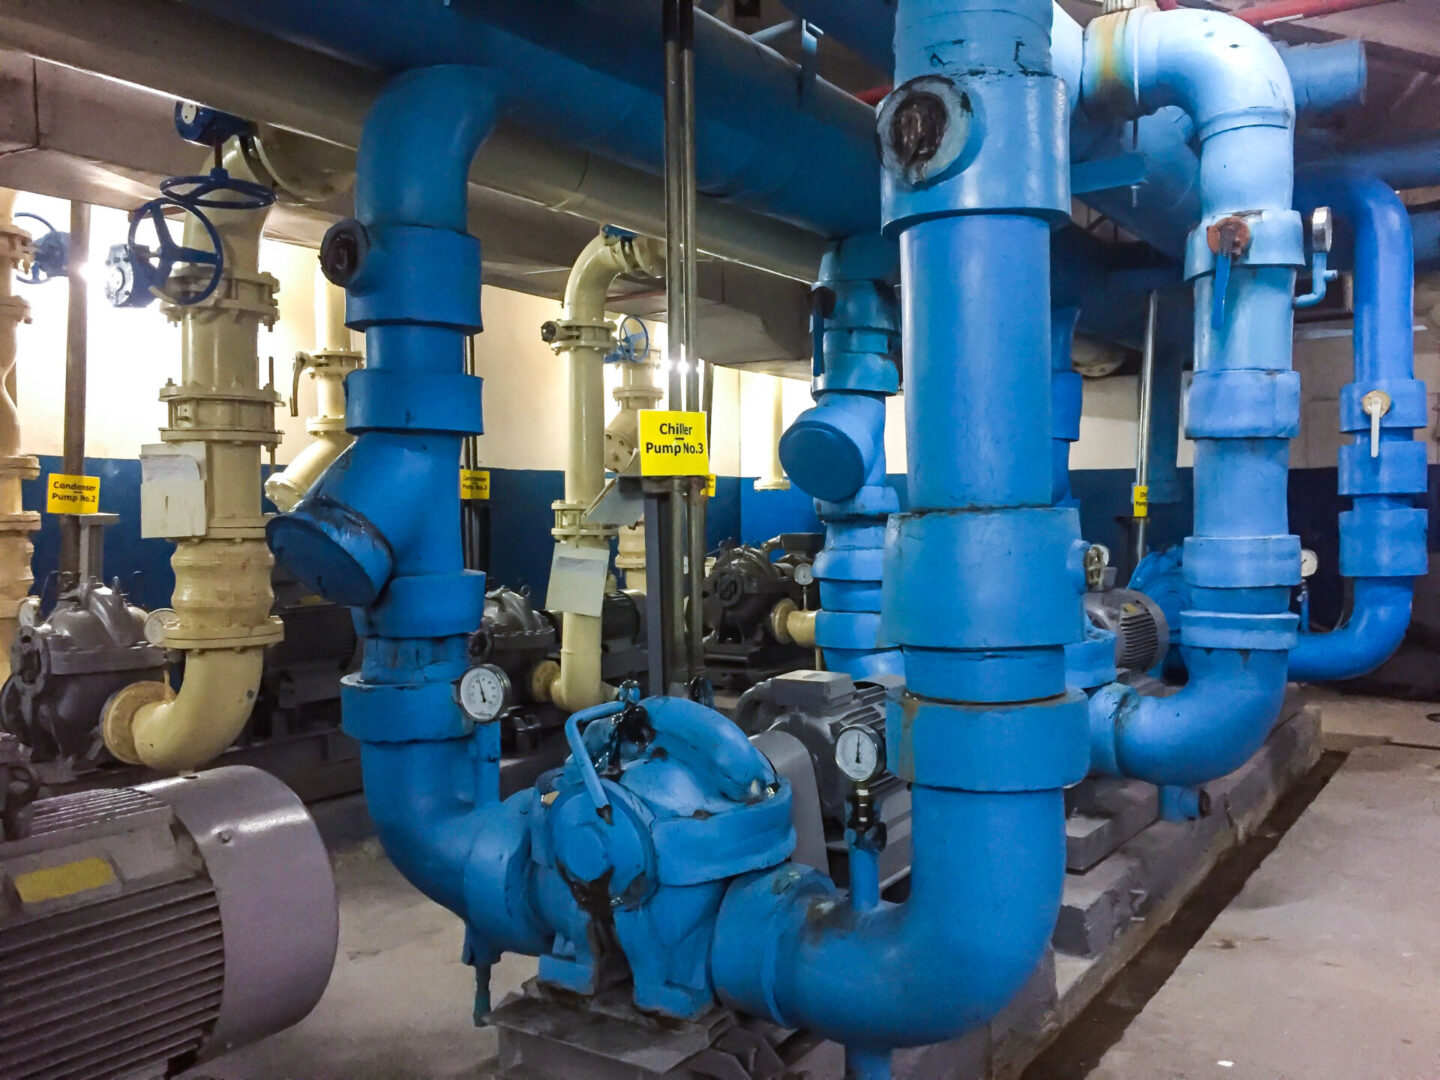 A large blue pipe system in a building.